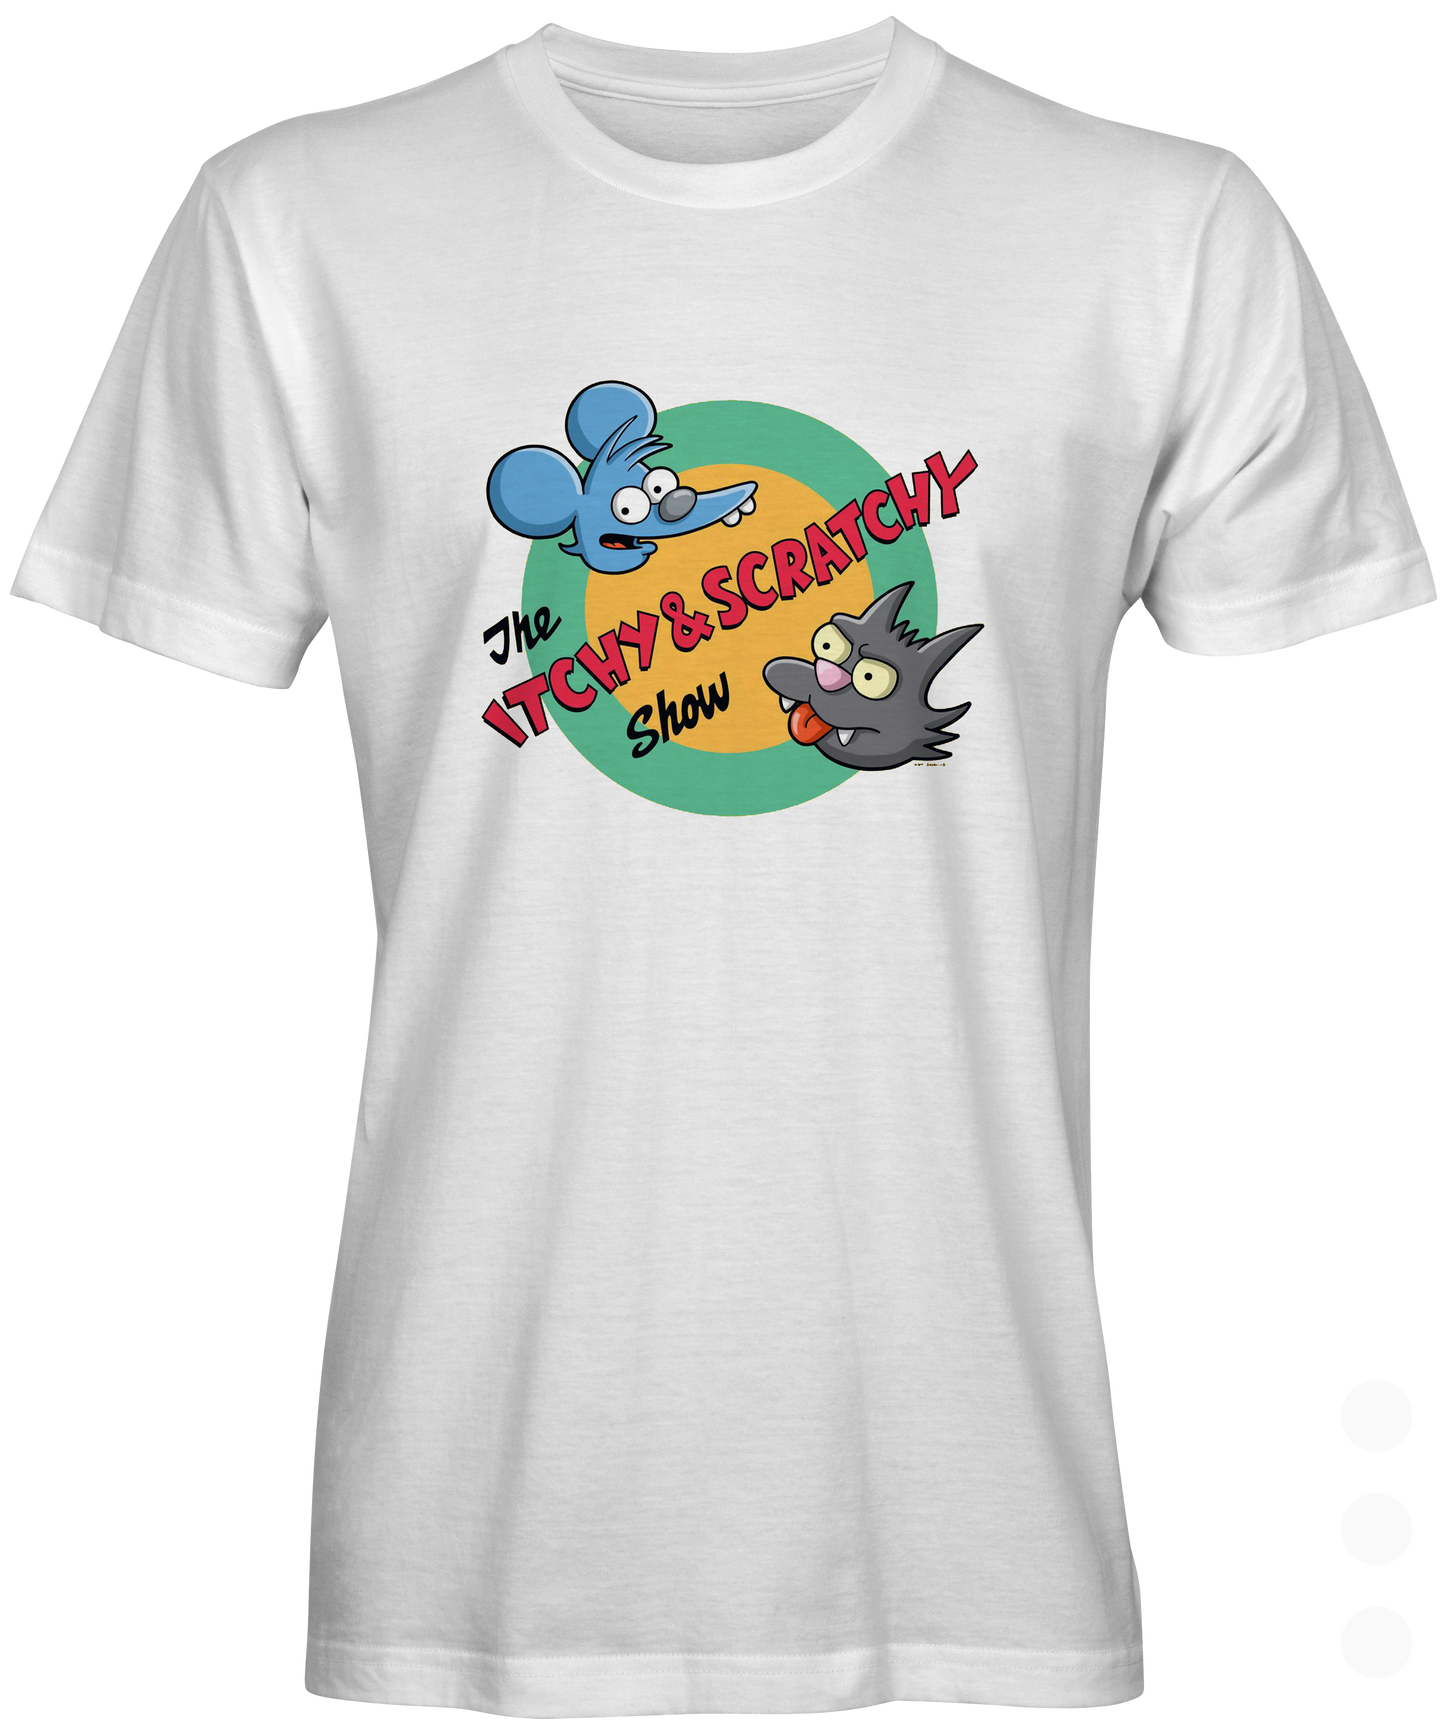  Itchy And Scratchy Graphic Tee